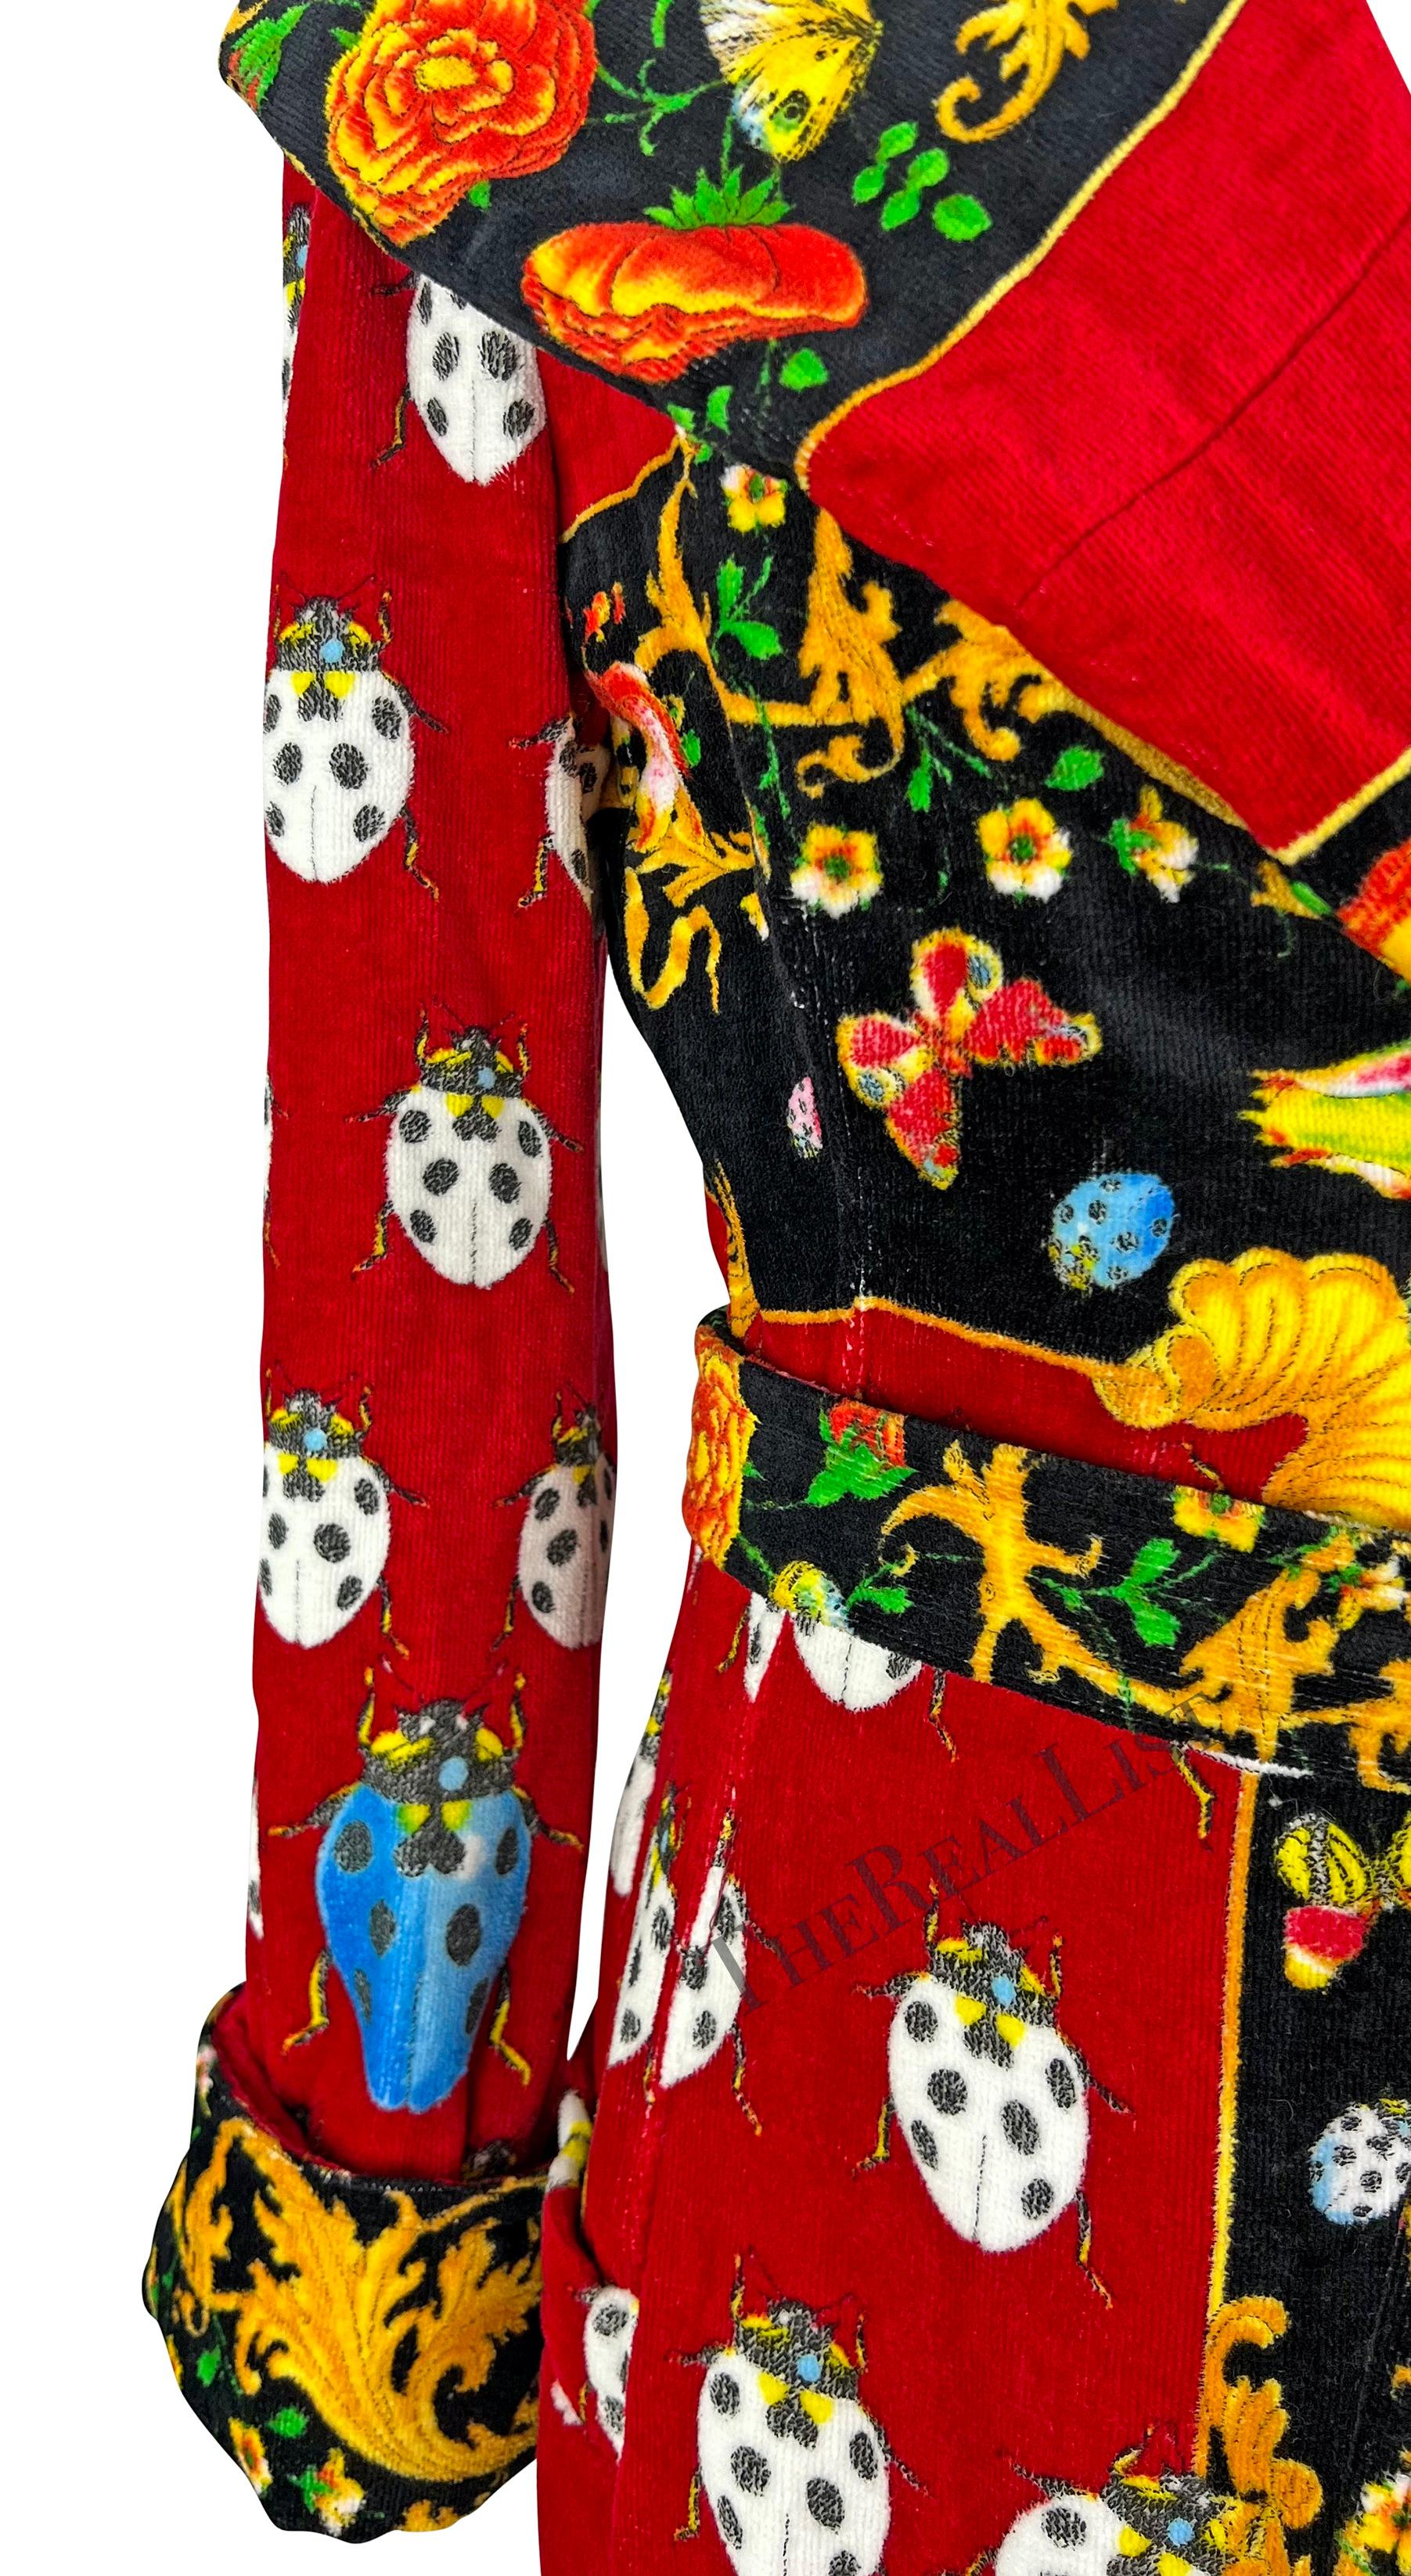 Women's S/S 1995 Gianni Versace Red Lady Bug Print Corset Boned Terrycloth Robe For Sale